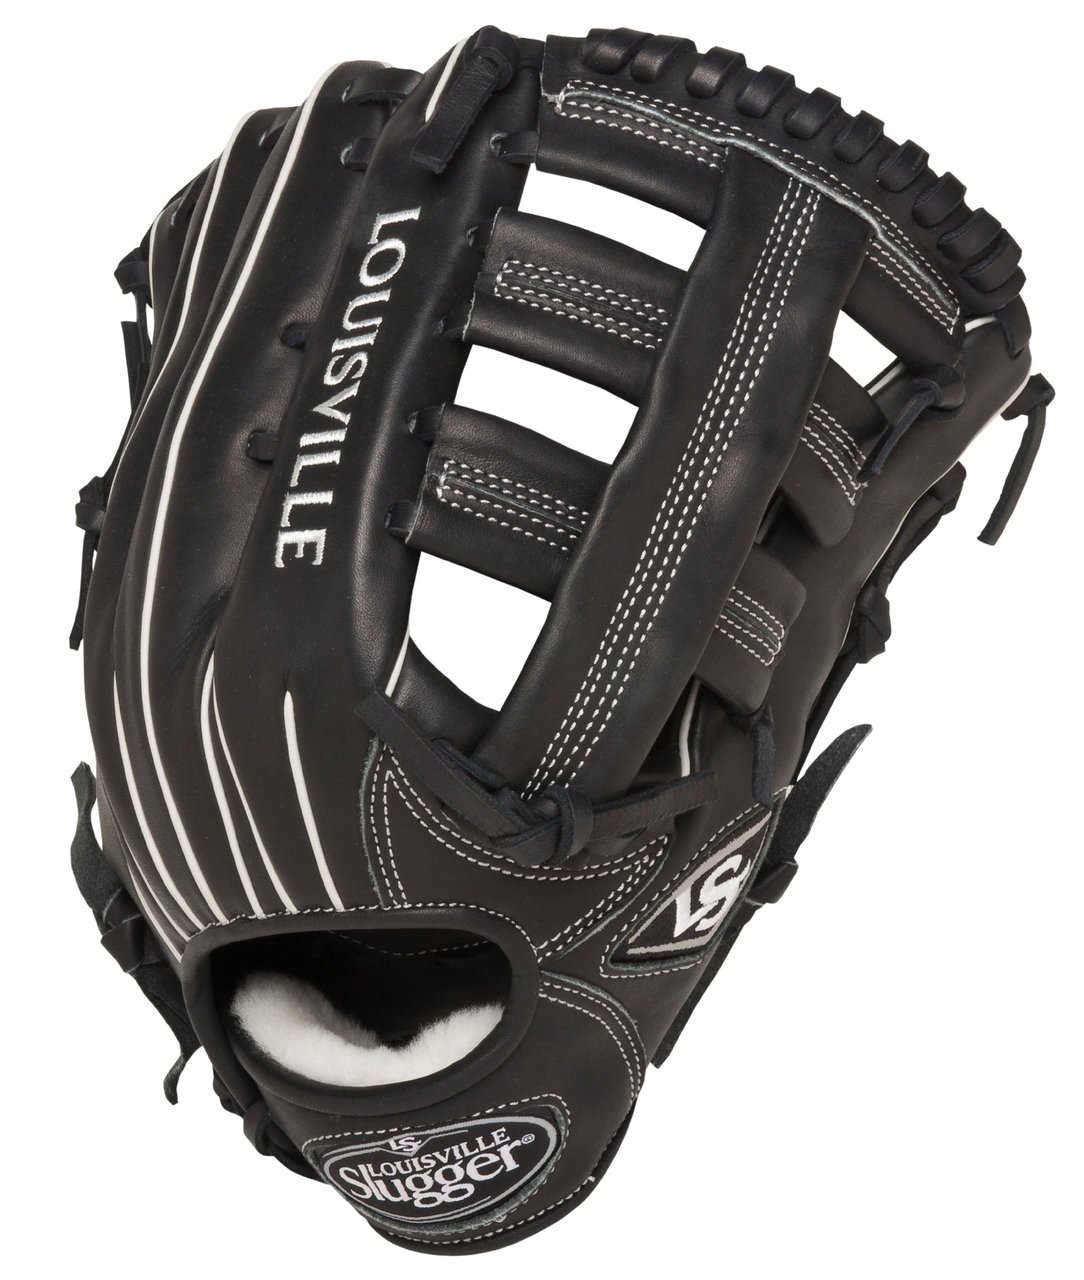 Louisville Slugger Pro Flare Black 12.75 in Baseball Glove (Left Handed Throw) : Louisville Slugger Pro Flare Fielding Gloves are preferred by top professional and college players. They are designed with the speed of the game in mind. Louisville Slugger Pro Flare gloves are designed to keep pace with the evolution of Baseball. The unique Flare design allows for quick-transfer of ball from glove to hand. Better technology, better materials and better design. There is a larger catching surface area made possible by the extra wide lacing and curved finger tips. The gloves are made from professional-grade, oil-infused leather for maximum feel and performance right off the shelf. The Louisville Slugger Pro Flare has unmatched durability and quick break-in.